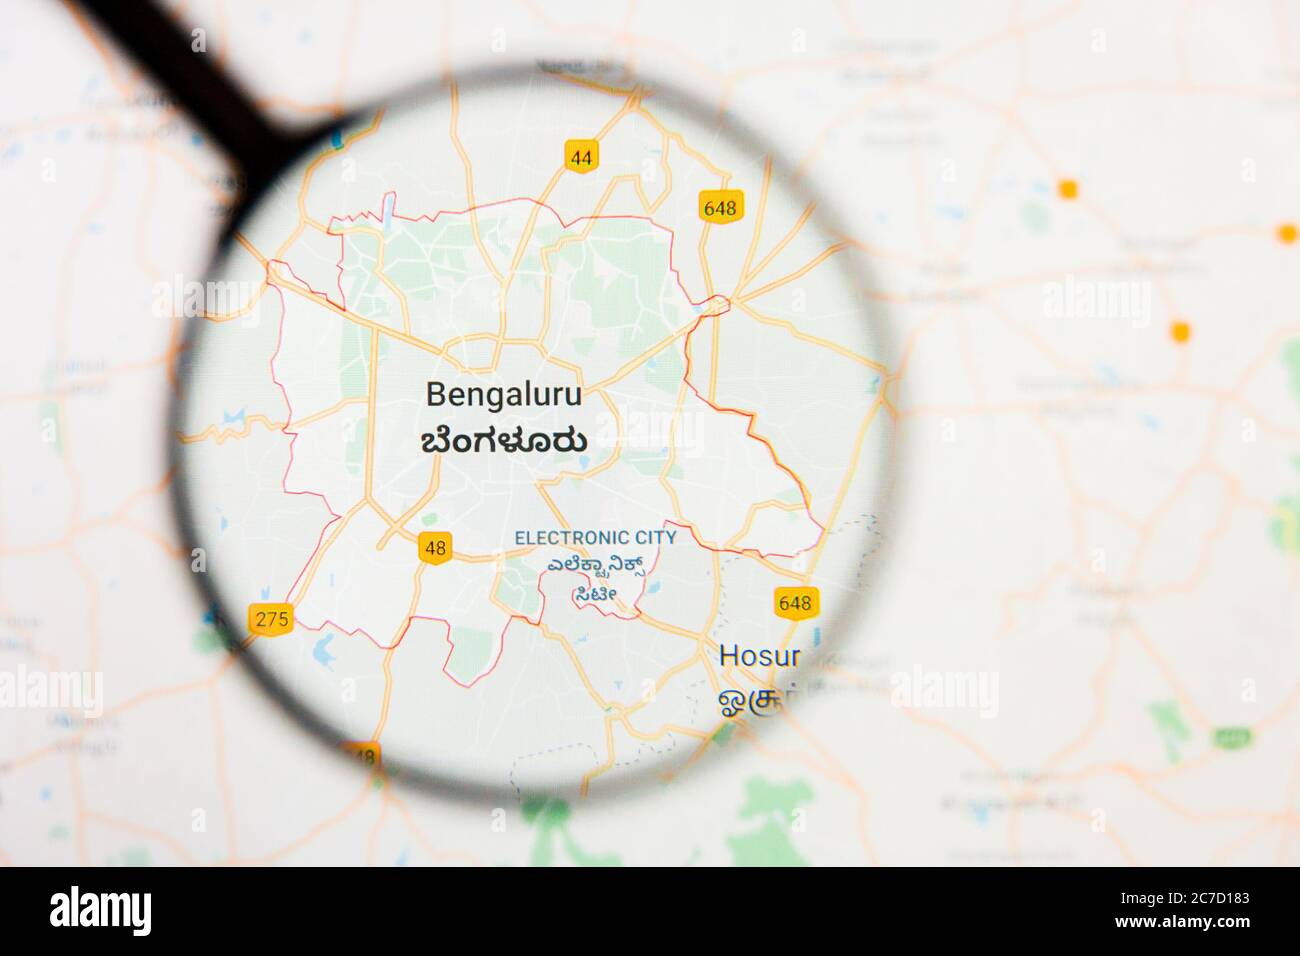 Bangalore, India city visualization illustrative concept on display screen through magnifying glass Stock Photo